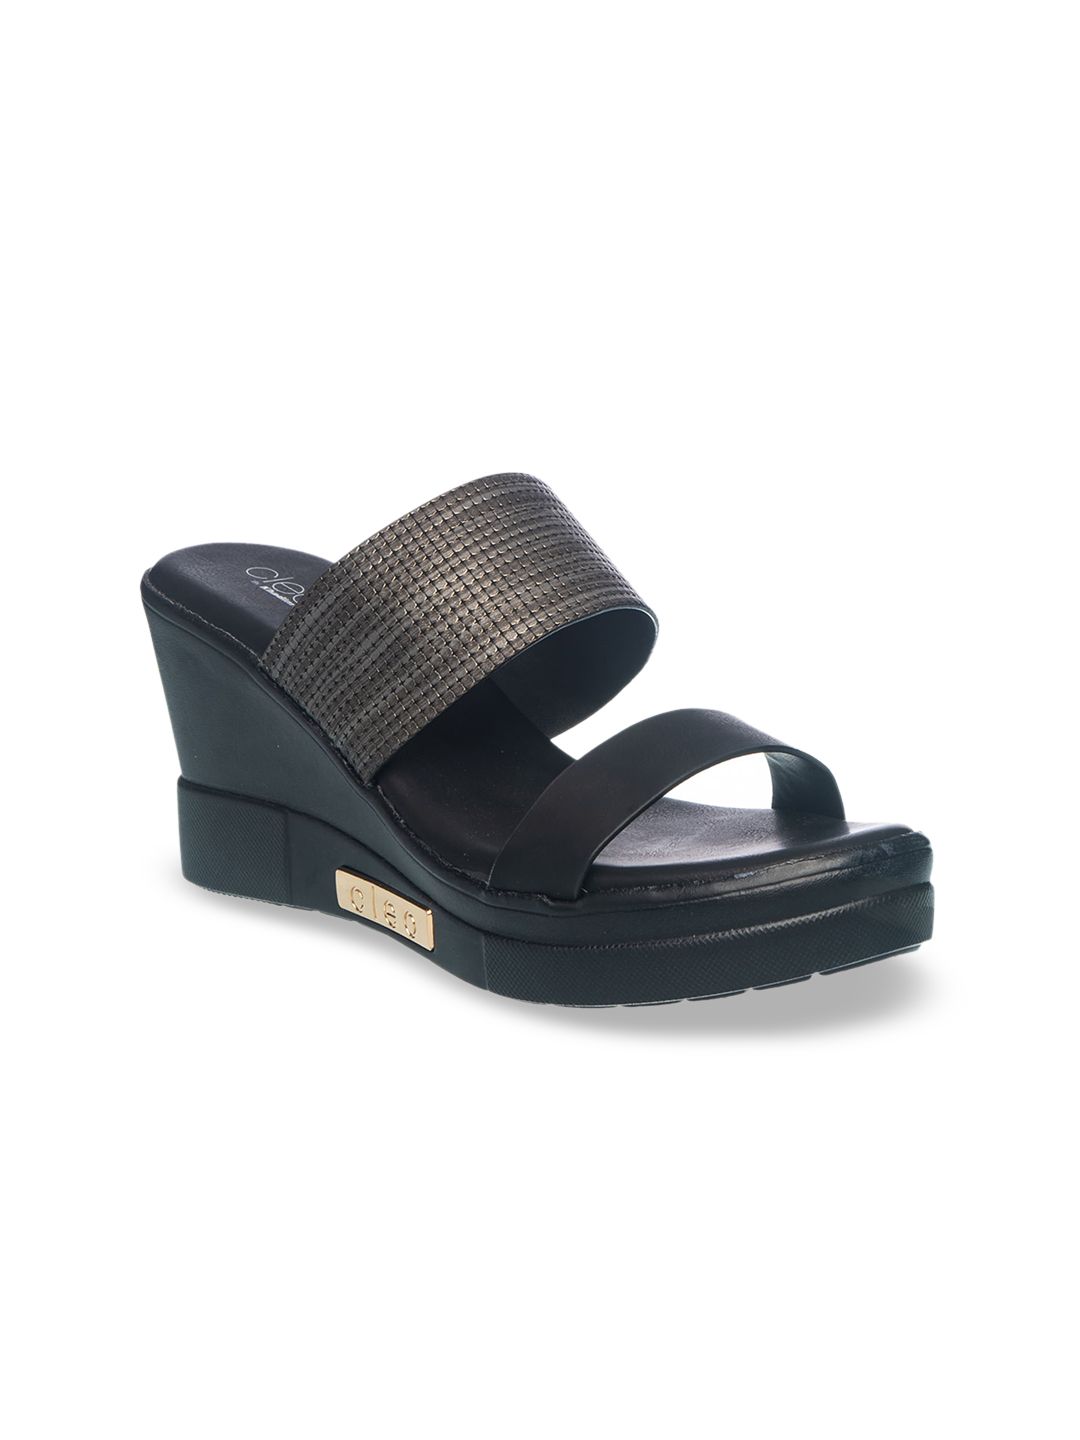 Khadims Black Colourblocked Wedge Sandals with Laser Cuts Price in India